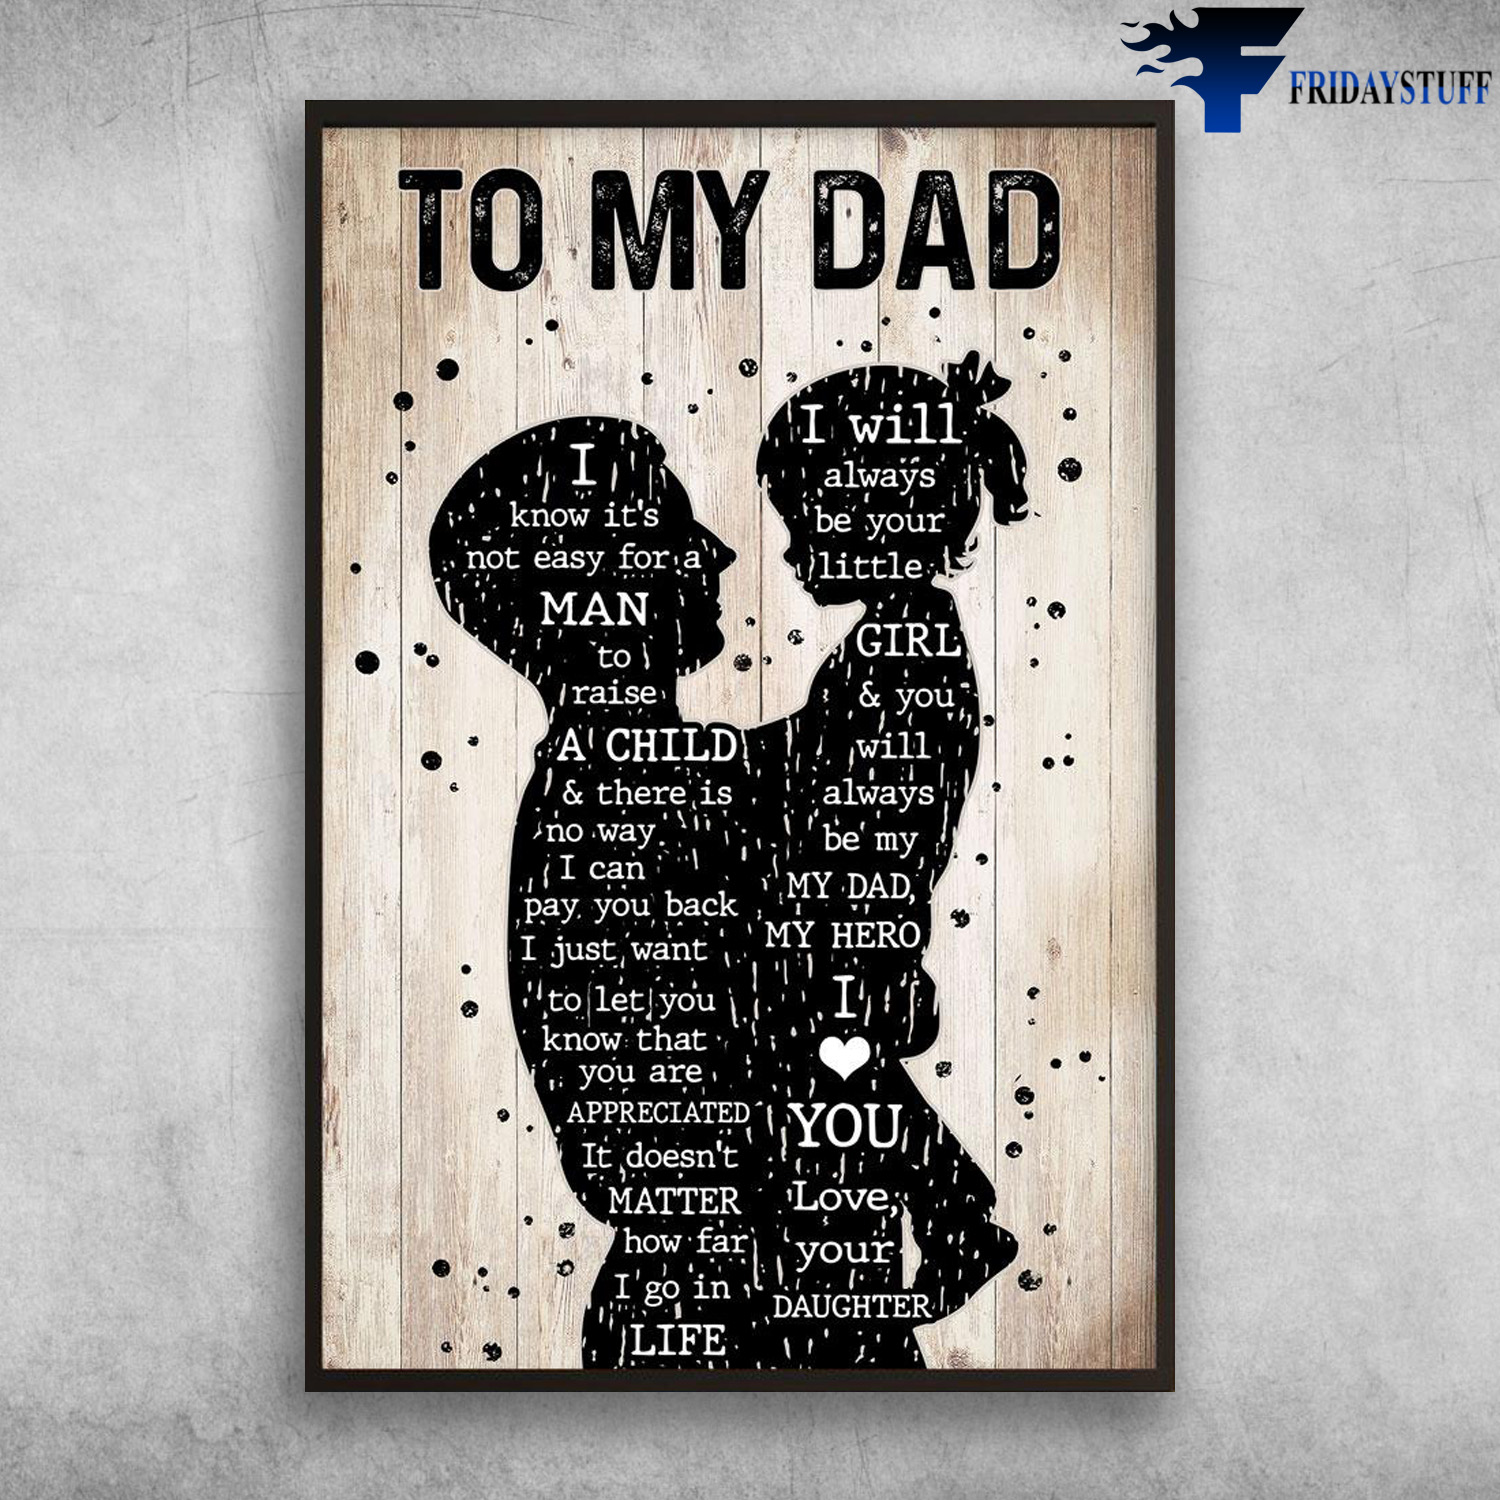 Dad And Daughter - To My Dad, I Know It’s Not Easy For A Man, To Raise A Child, And There Is No Way, I Can Pay You Back, I Just Want To Let You Know That, You Are Appreciated, I Doesn’t Matter How Far I Go In Life